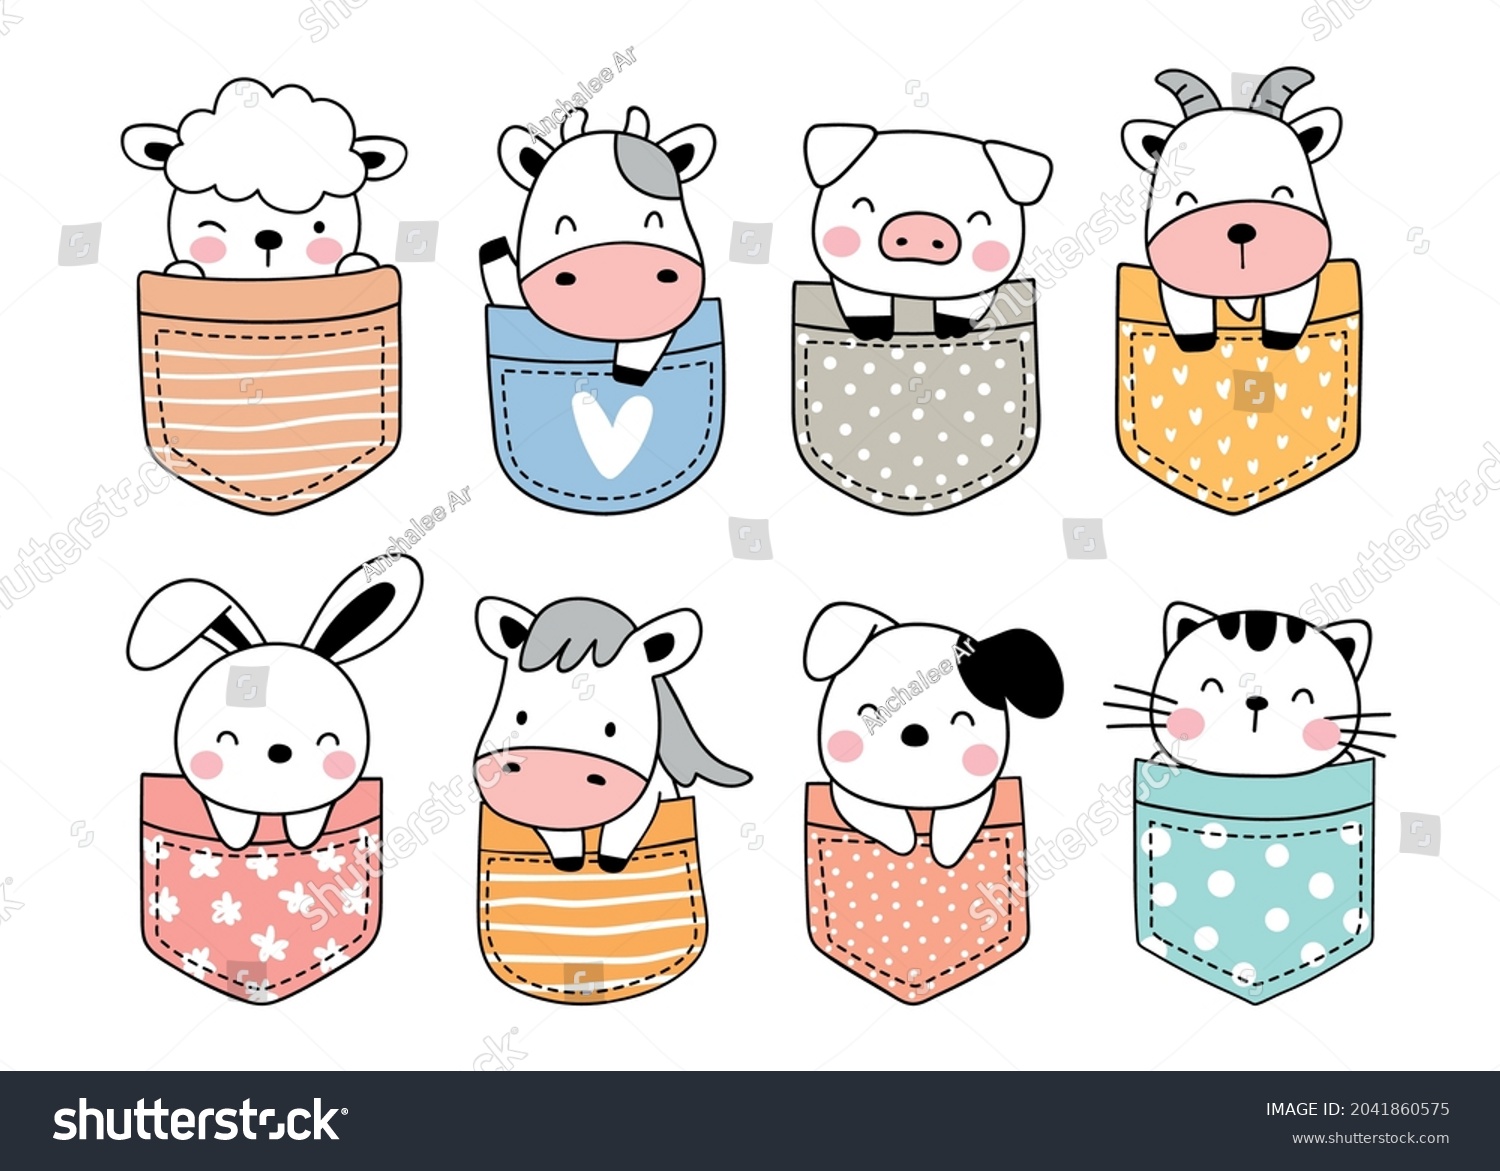 SVG of Draw vector illustration character design collection cute animal farm in pocket Doodle cartoon style svg